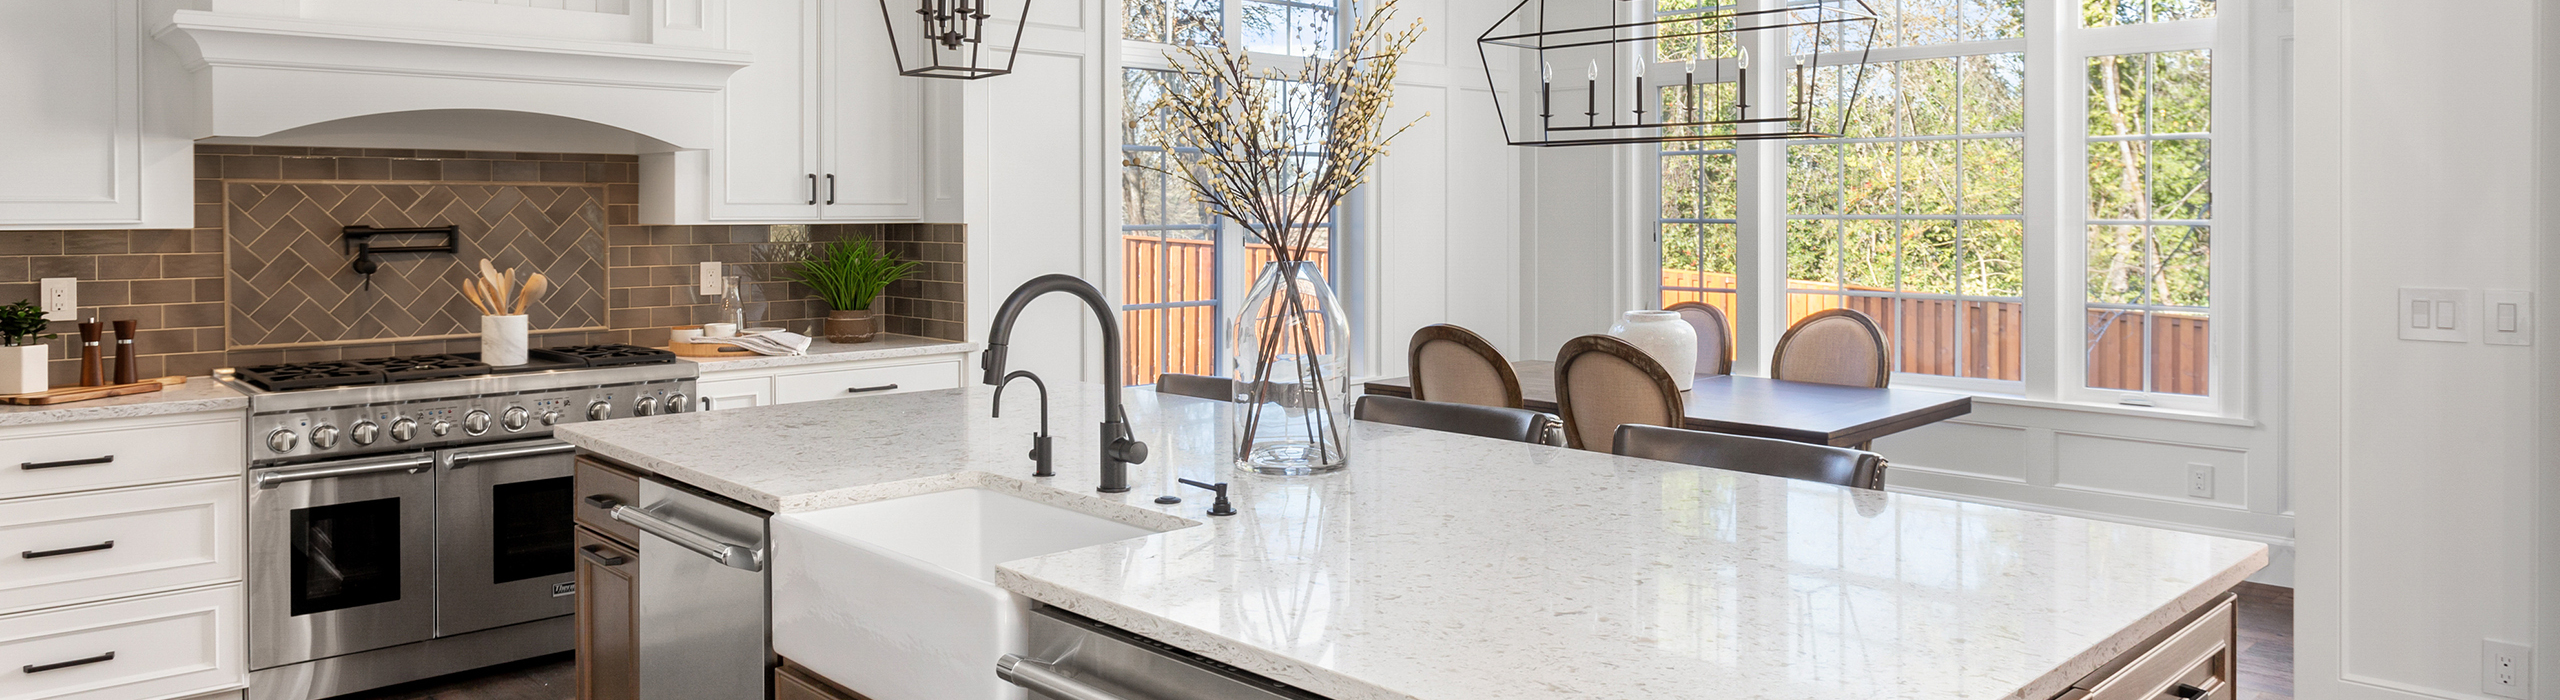 Decorative photo of a remodeled kitchen. Pricing a home depends on the attributes and conditions of the sellers house compared to the recent sales.